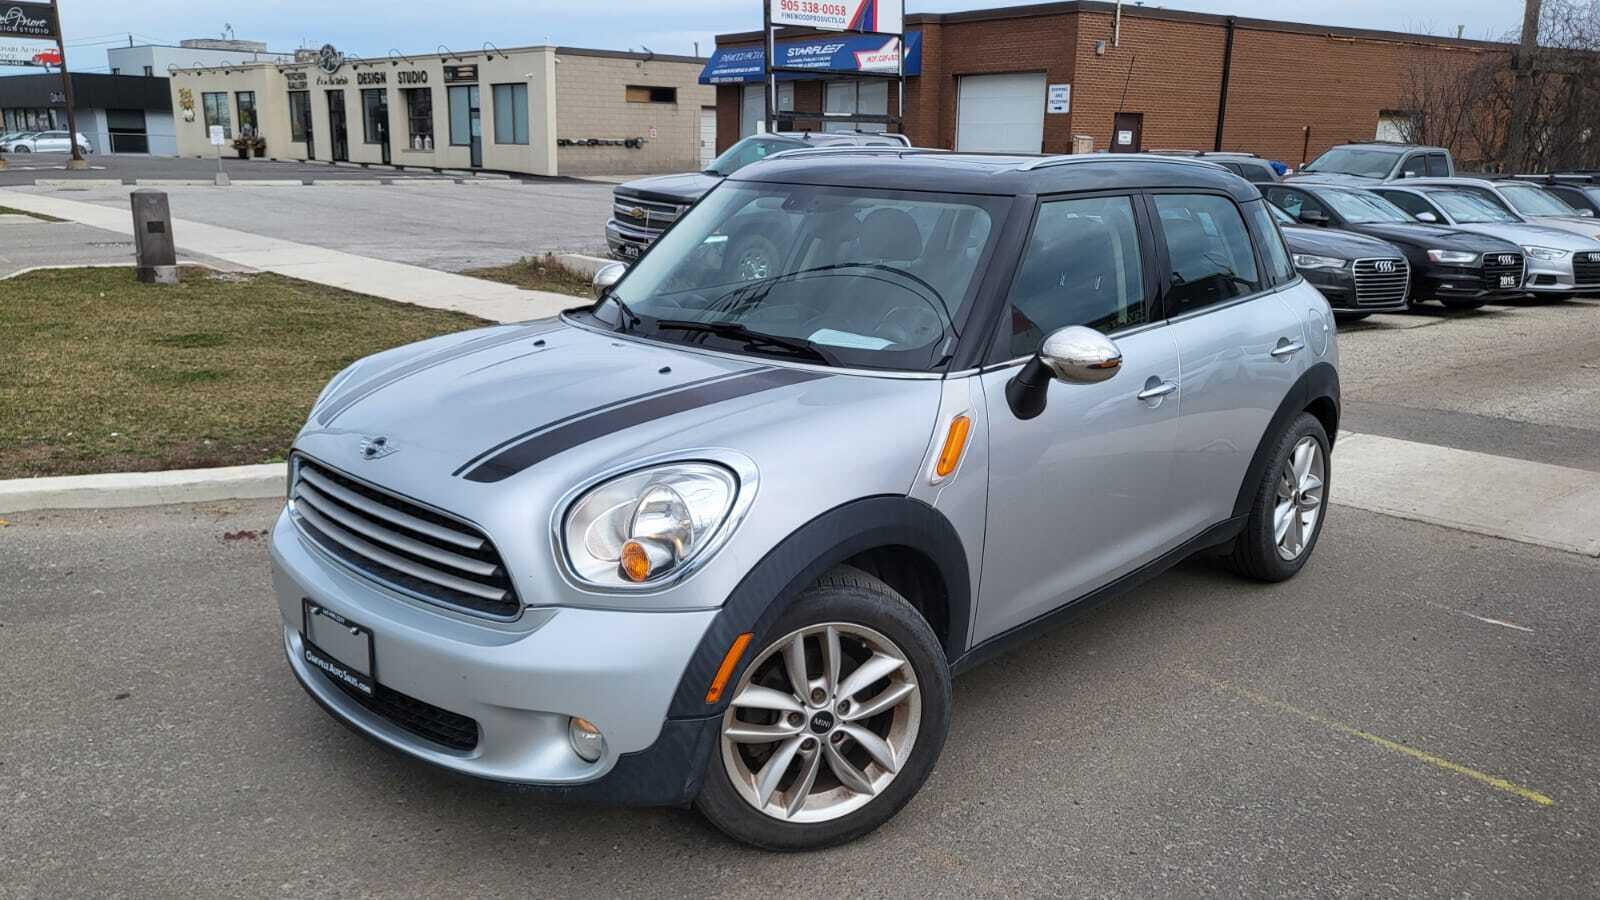 2012 MINI Cooper Countryman 4DR,LEATHER,PANOROOF,PARKING SENSORS,CERTIFIED